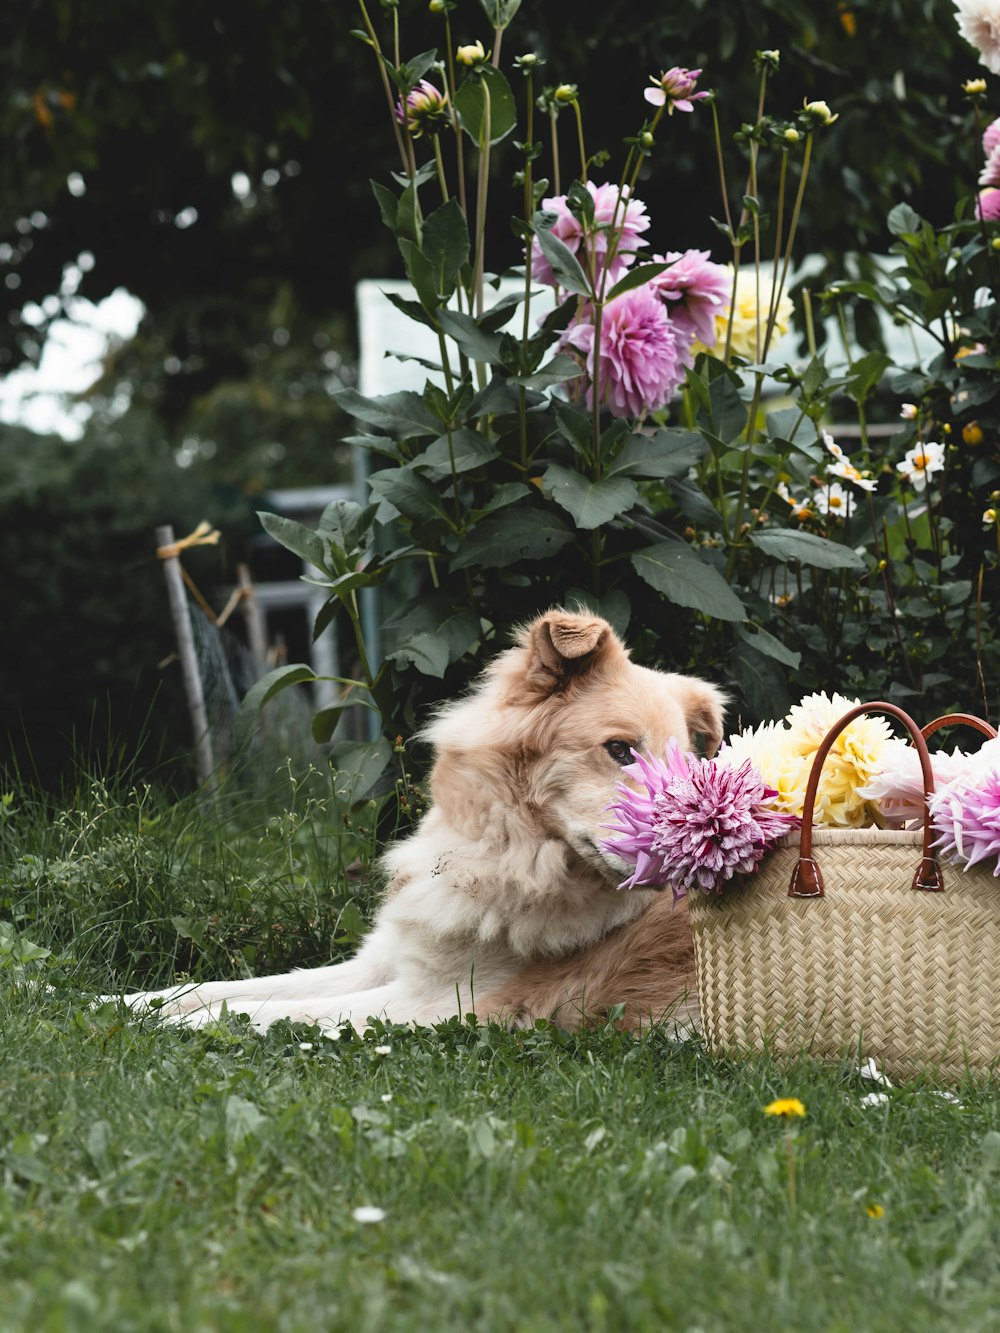 a dog sitting in the grass with a basket of flowers